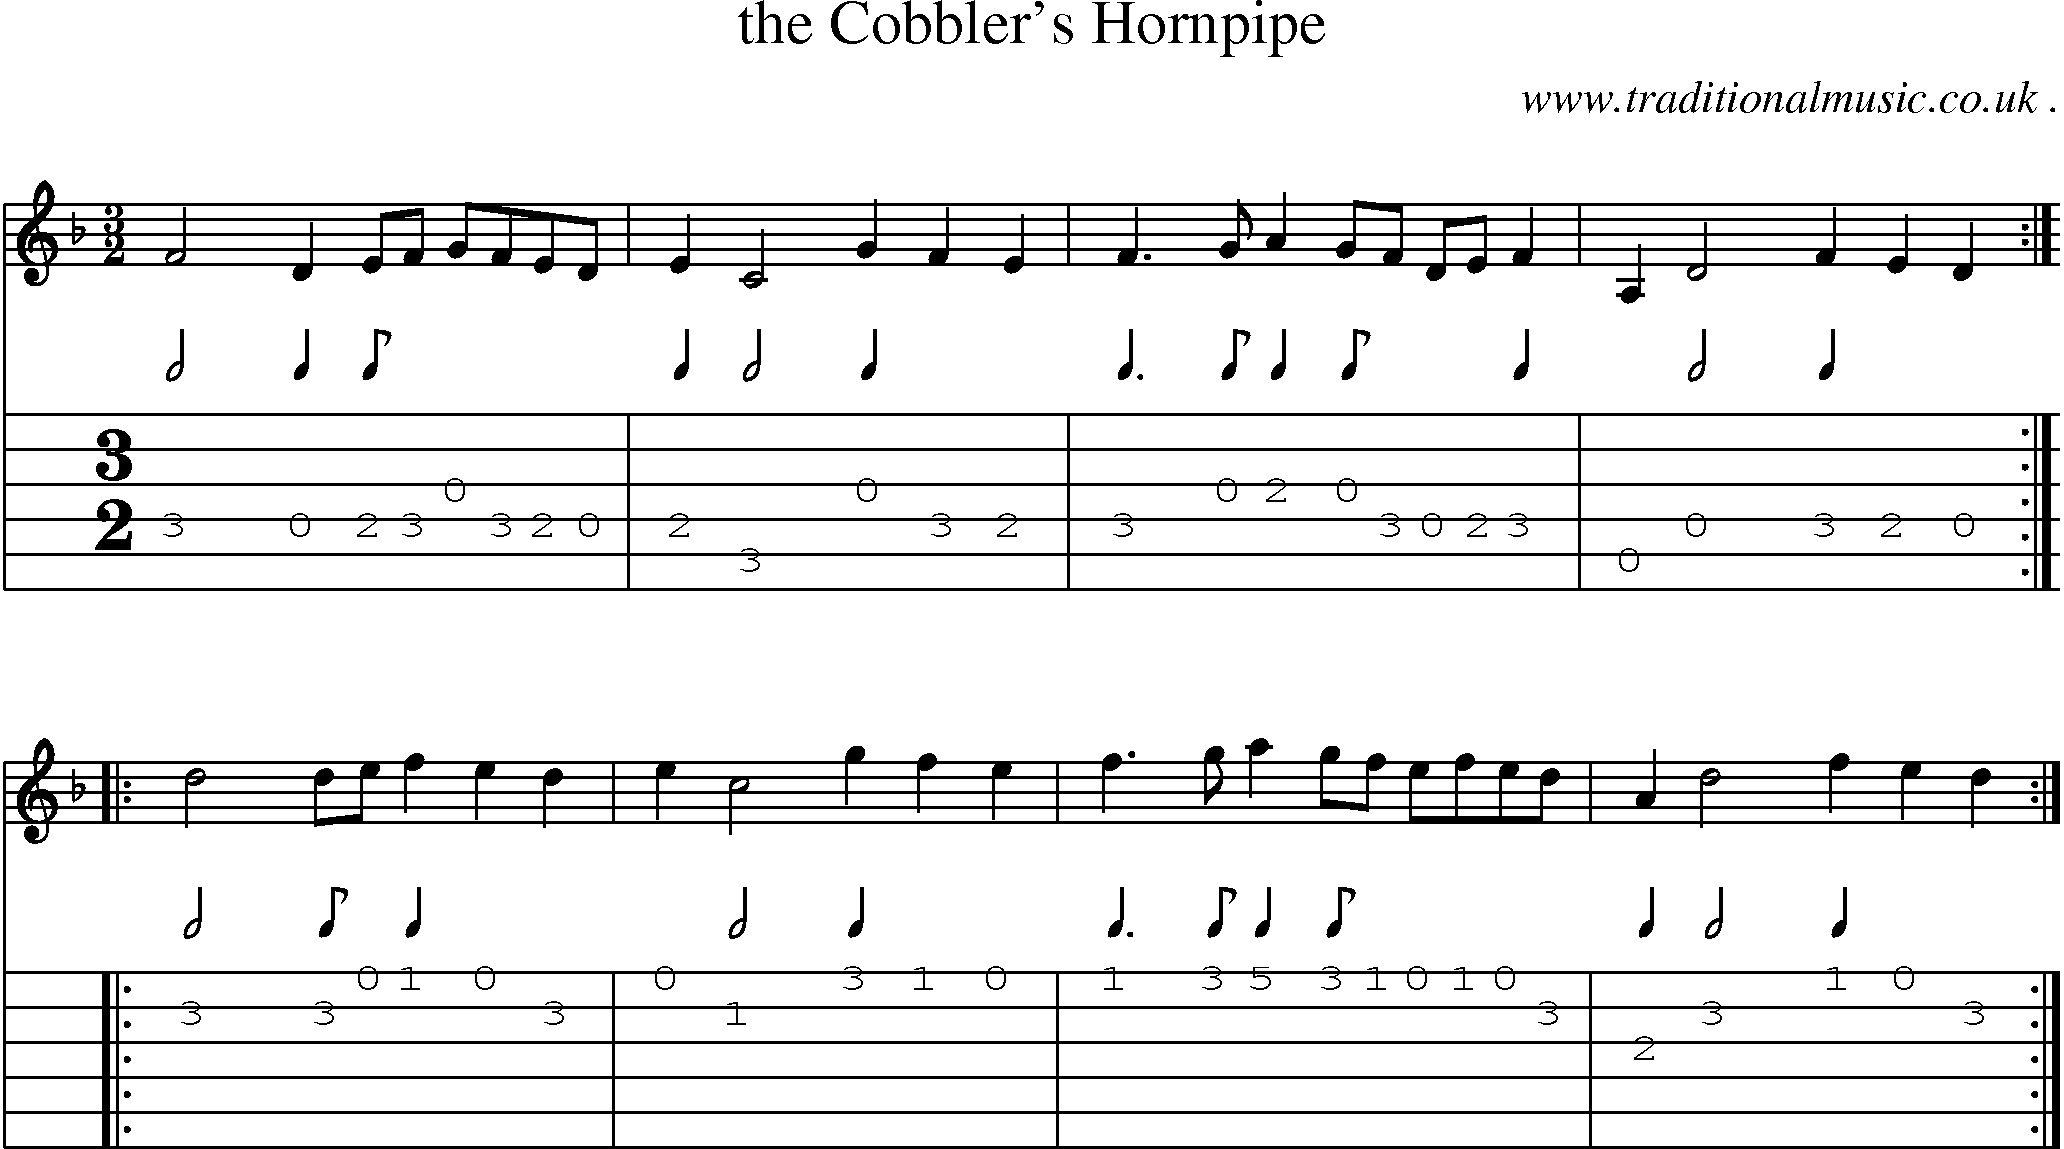 Sheet-Music and Guitar Tabs for The Cobblers Hornpipe